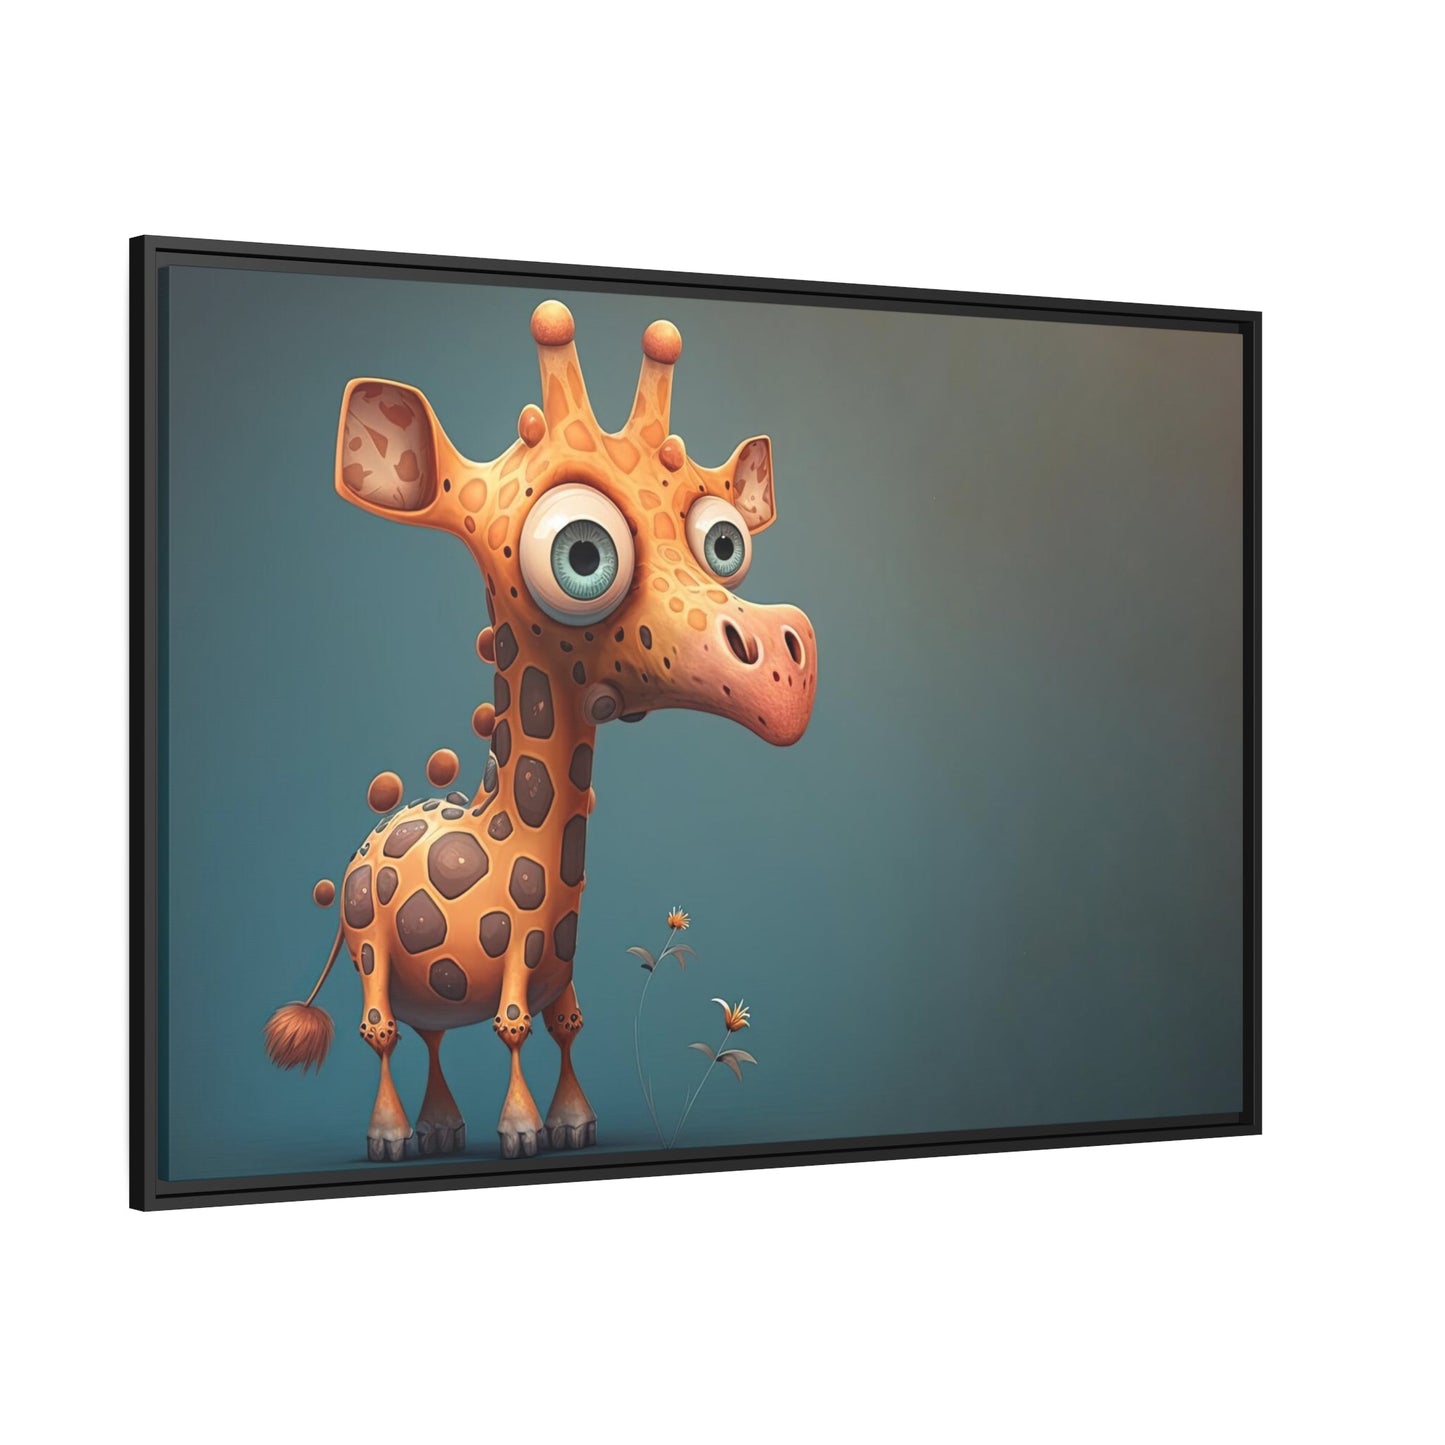 Portrait of a Gentle Giant: Framed Canvas with a Giraffe in the Wild